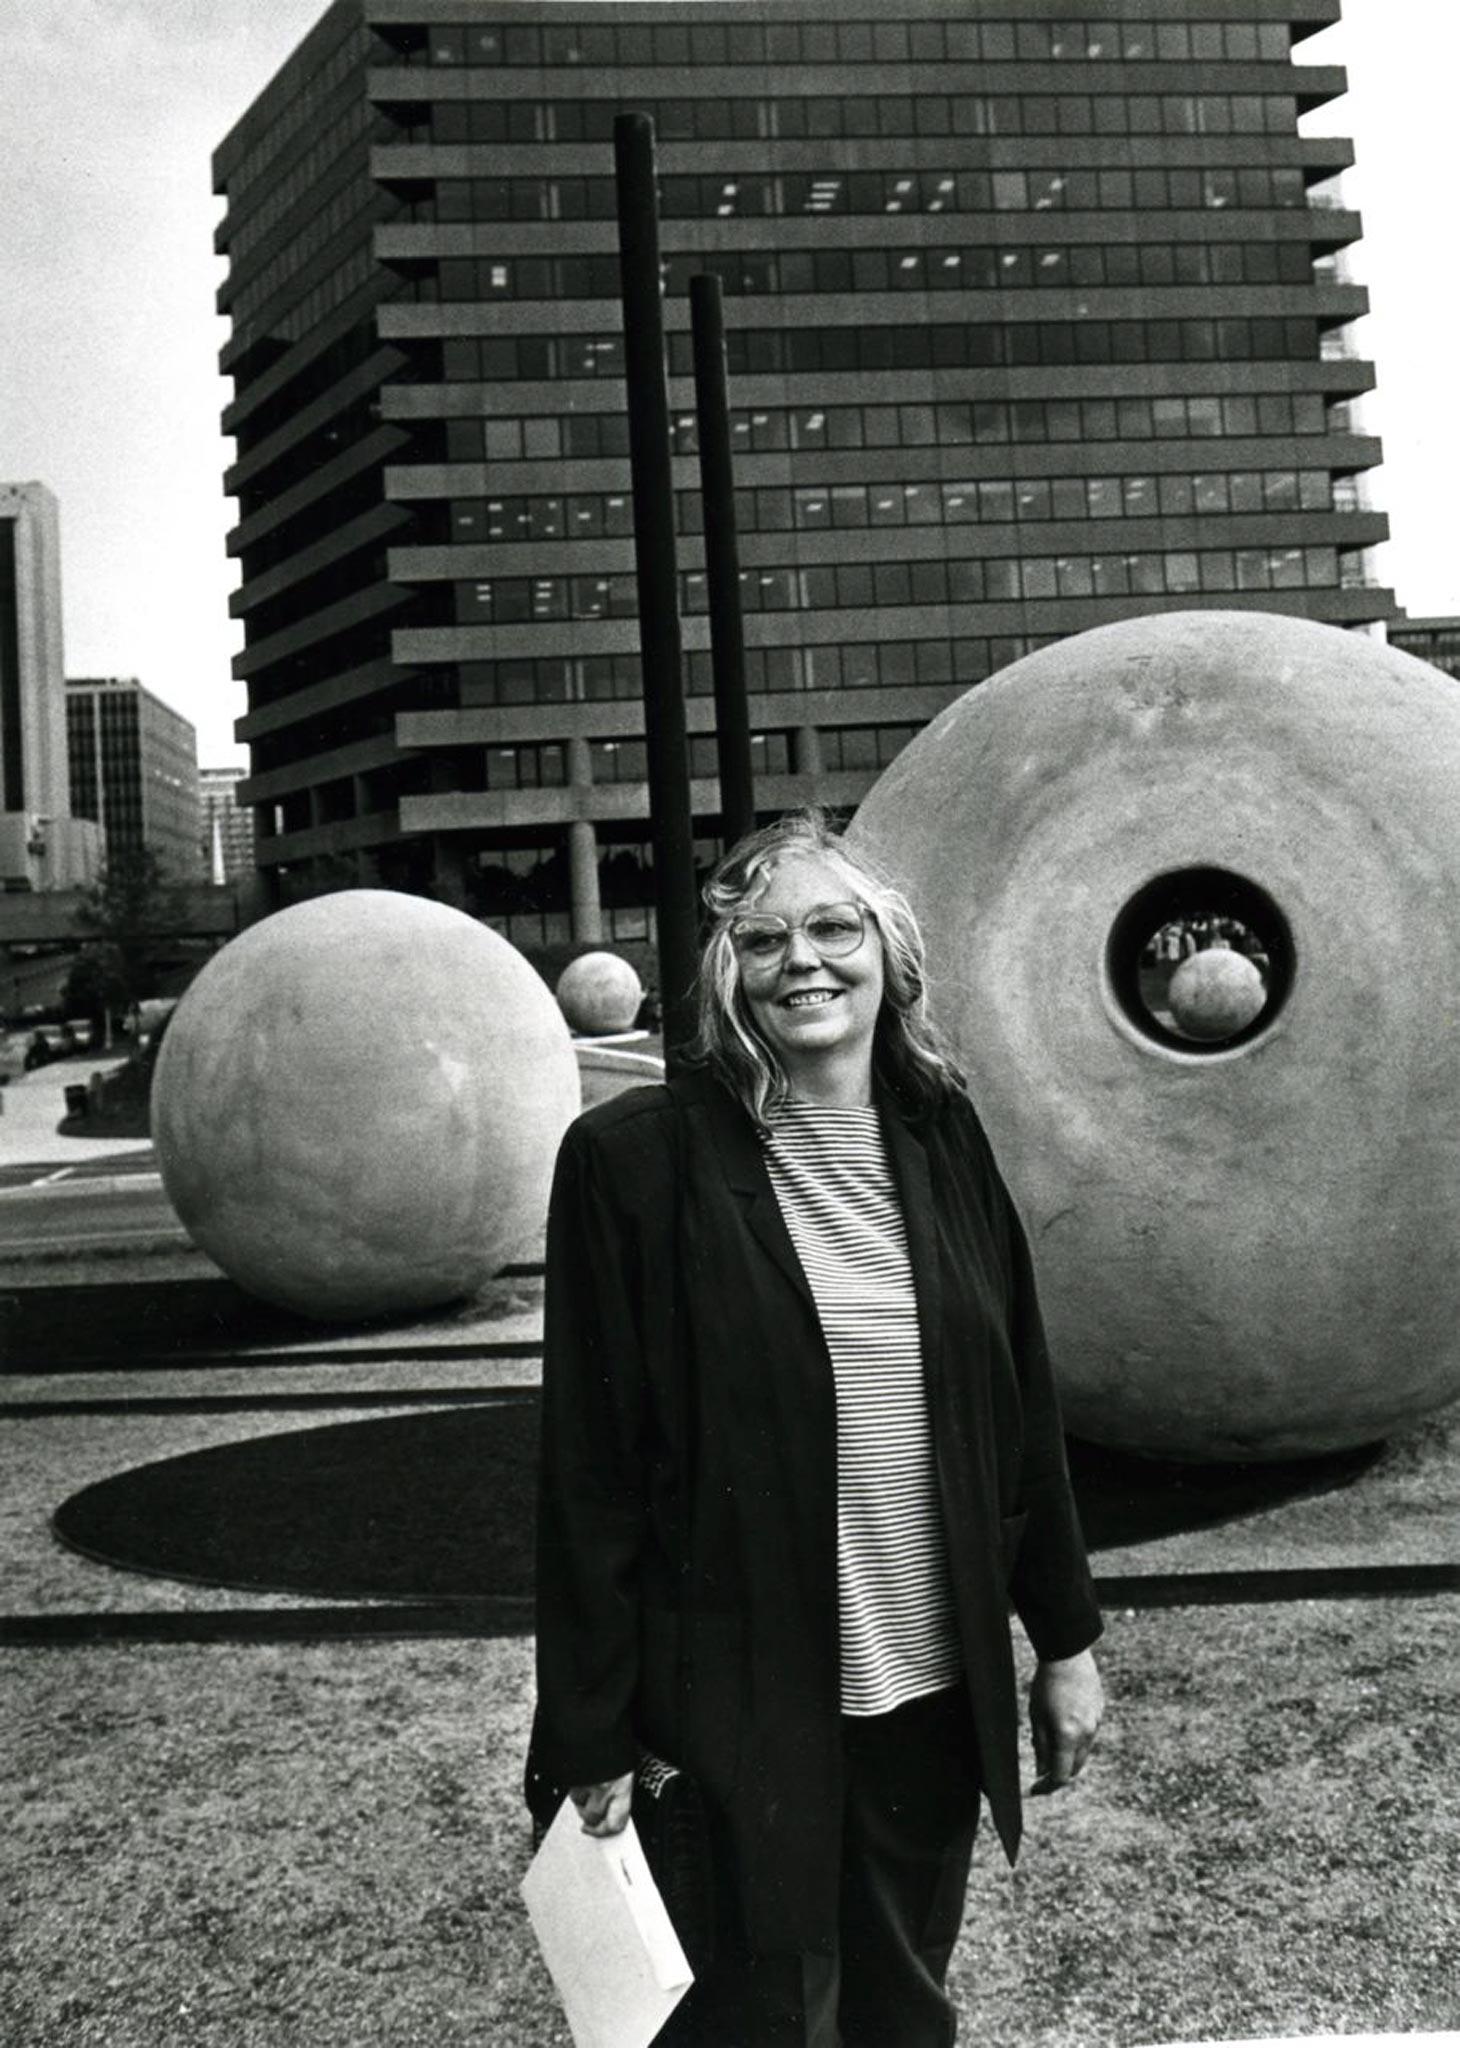 a person standing smiling at the camera. In the background are large concrete spheres and tall buildings